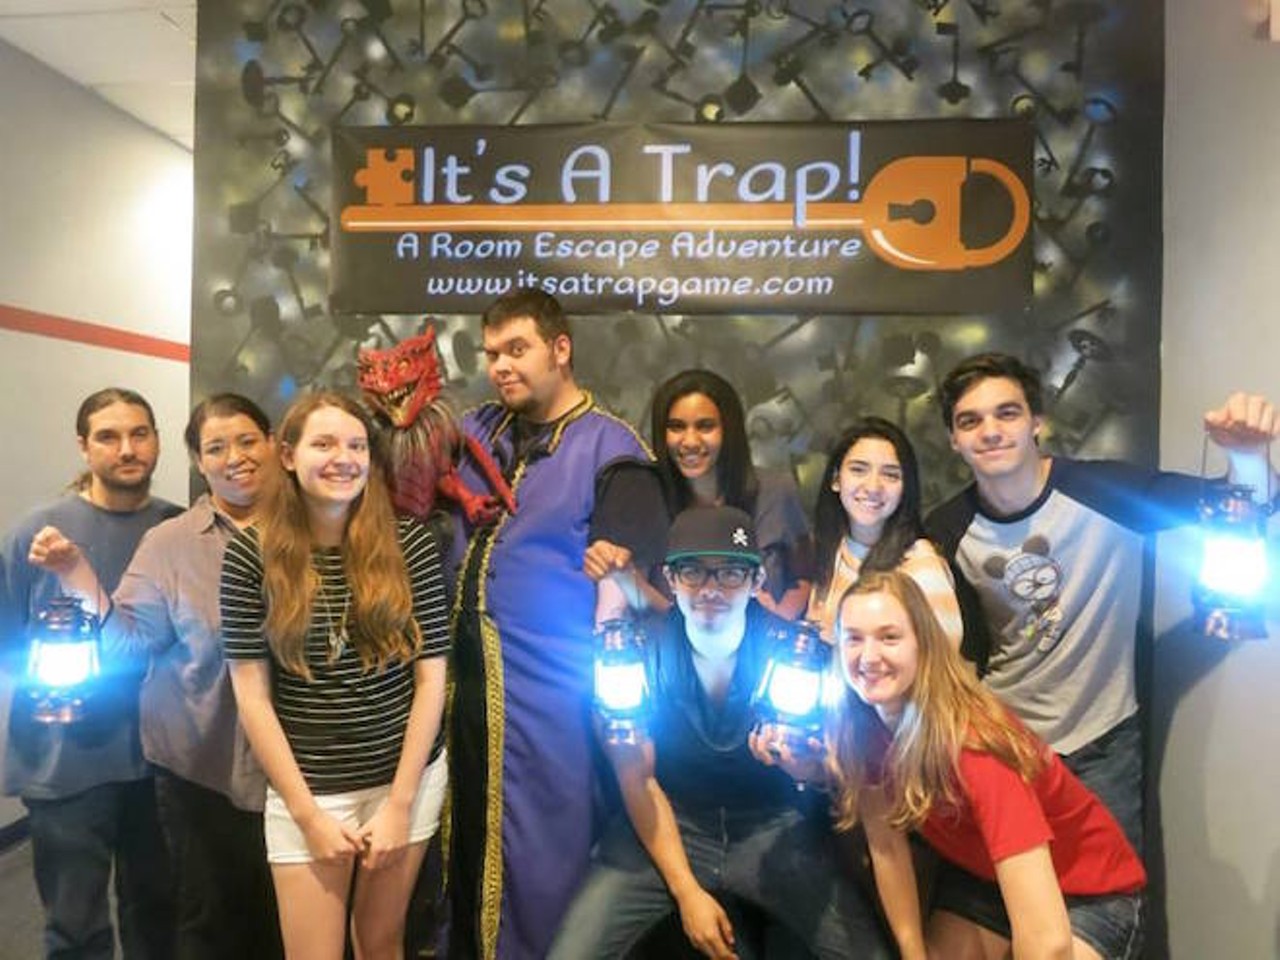 It's a Trap!6744 Aloma Ave., Winter Park, 407-960-3824, itsatrapgame.comWinter Park's It's a Trap! drops you into fantasy and science fiction-themed scenarios involving evil necromancers, trapped dragons, deadly pathogens and an incoming post-apocalyptic zombie horde. Tickets are $23 and must be booked in advance at their site.Photo via It's a Trap on Facebook